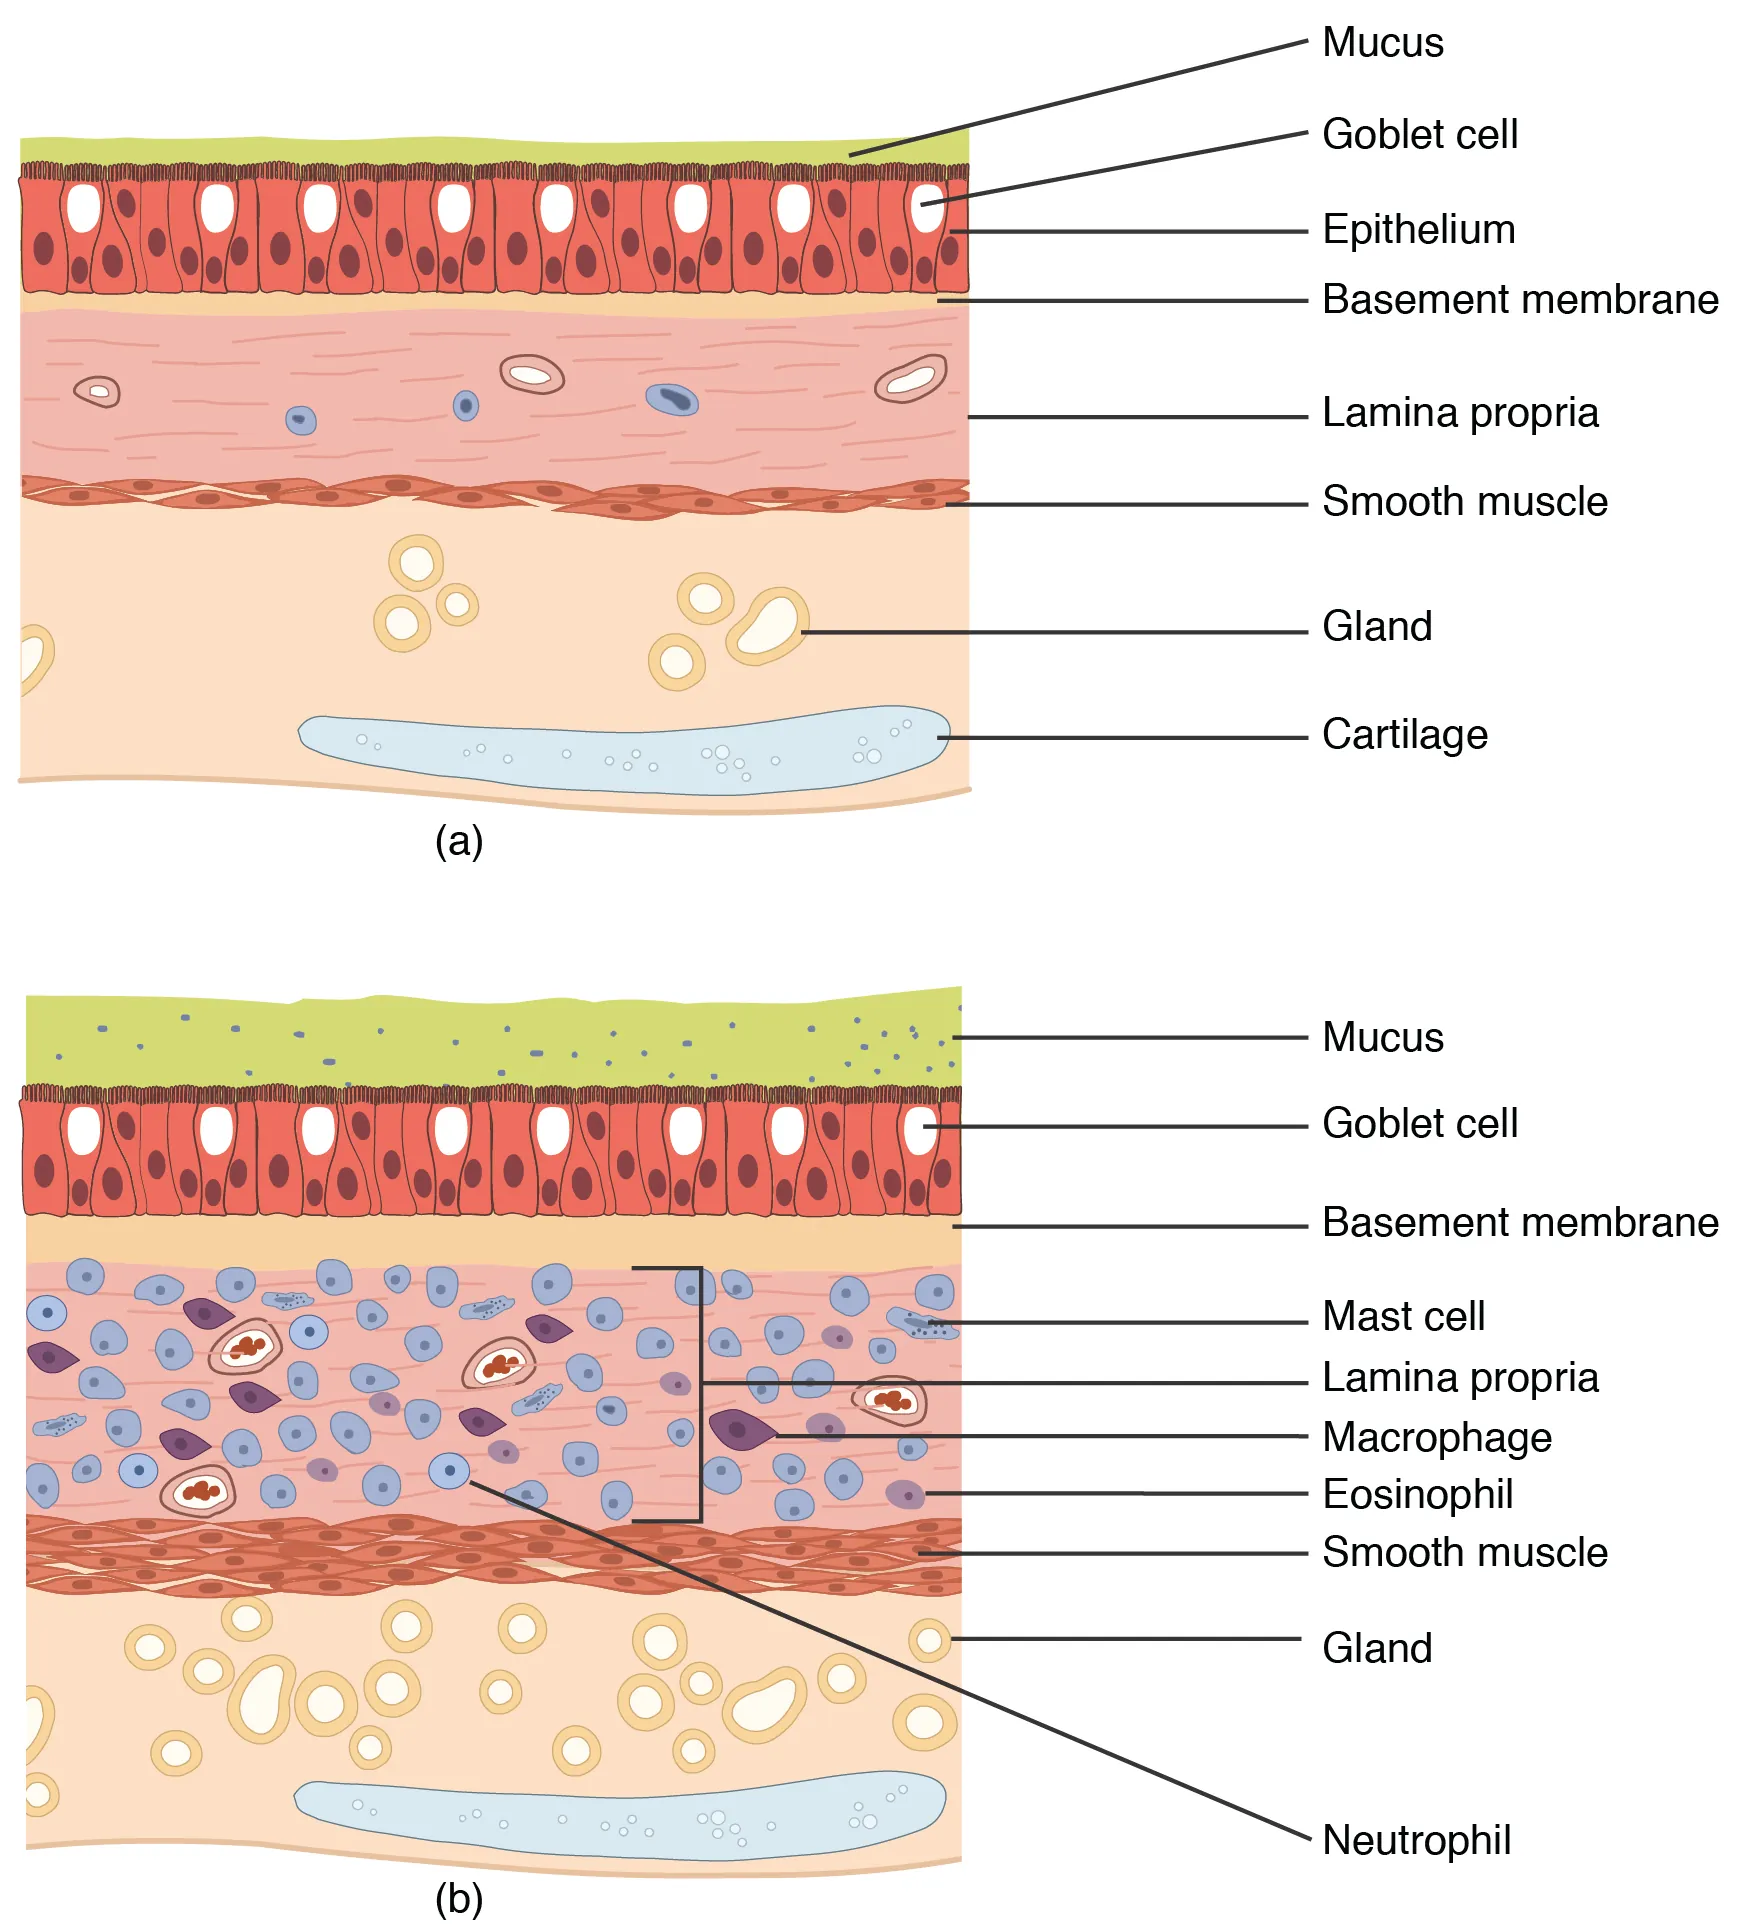 The top panel of this figure shows normal lung tissue, and the bottom panel shows lung tissue inflamed by asthma.